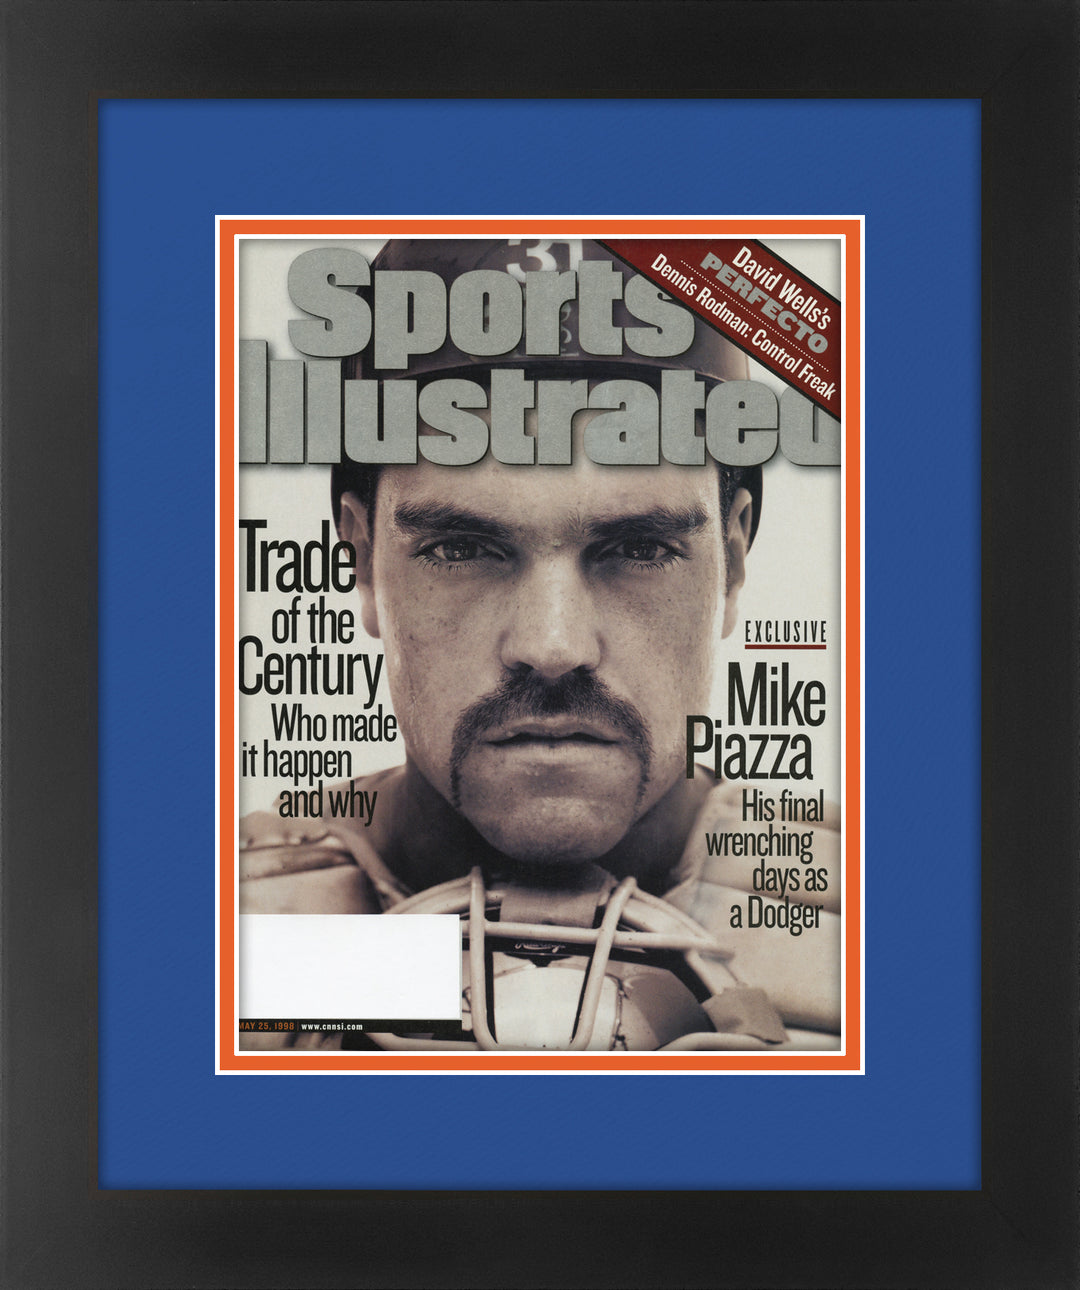 Mike Piazza Vintage Sports Illustrated Magazine May 25, 1998 Original Issue Professionally Matted and Framed 14.25 x 17